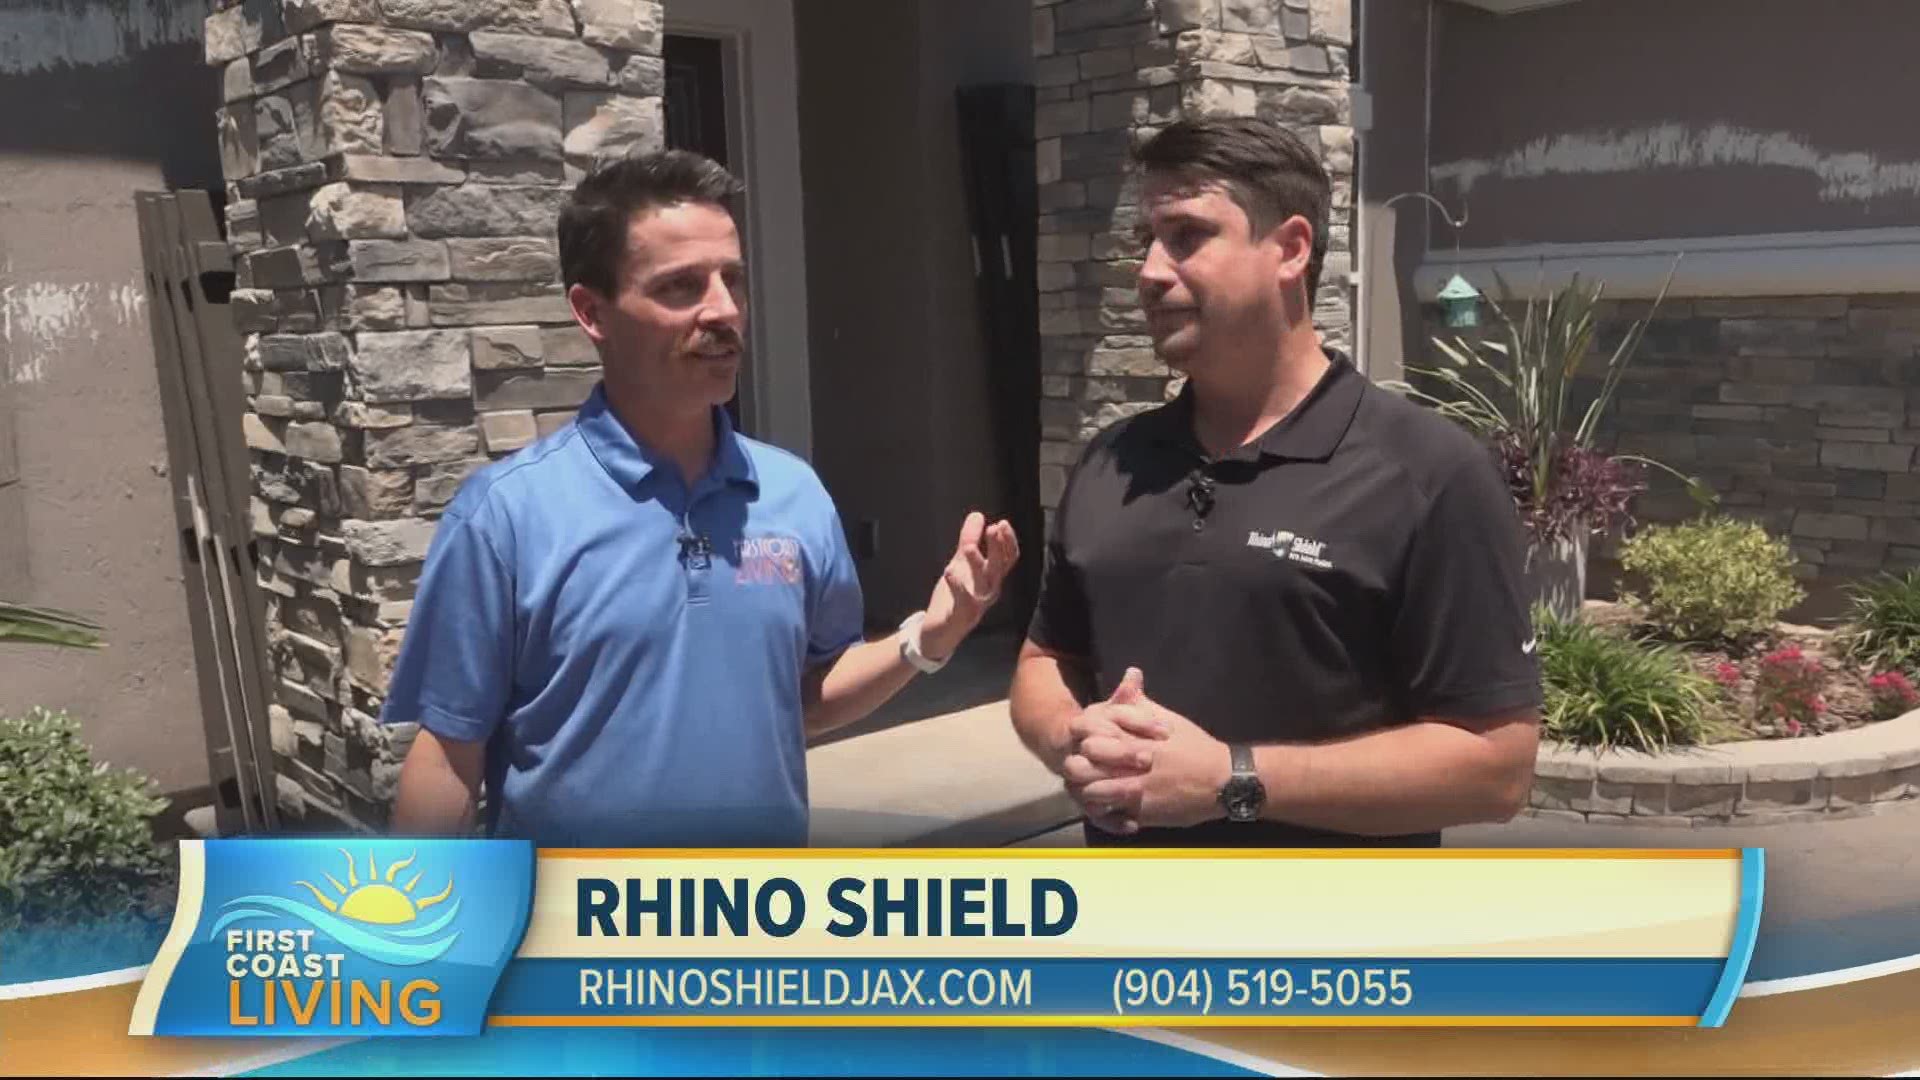 Rhino Shield offers a protective coating for your home's exterior.  More info: (904) 519-5505 www.rhinoshieldjax.com